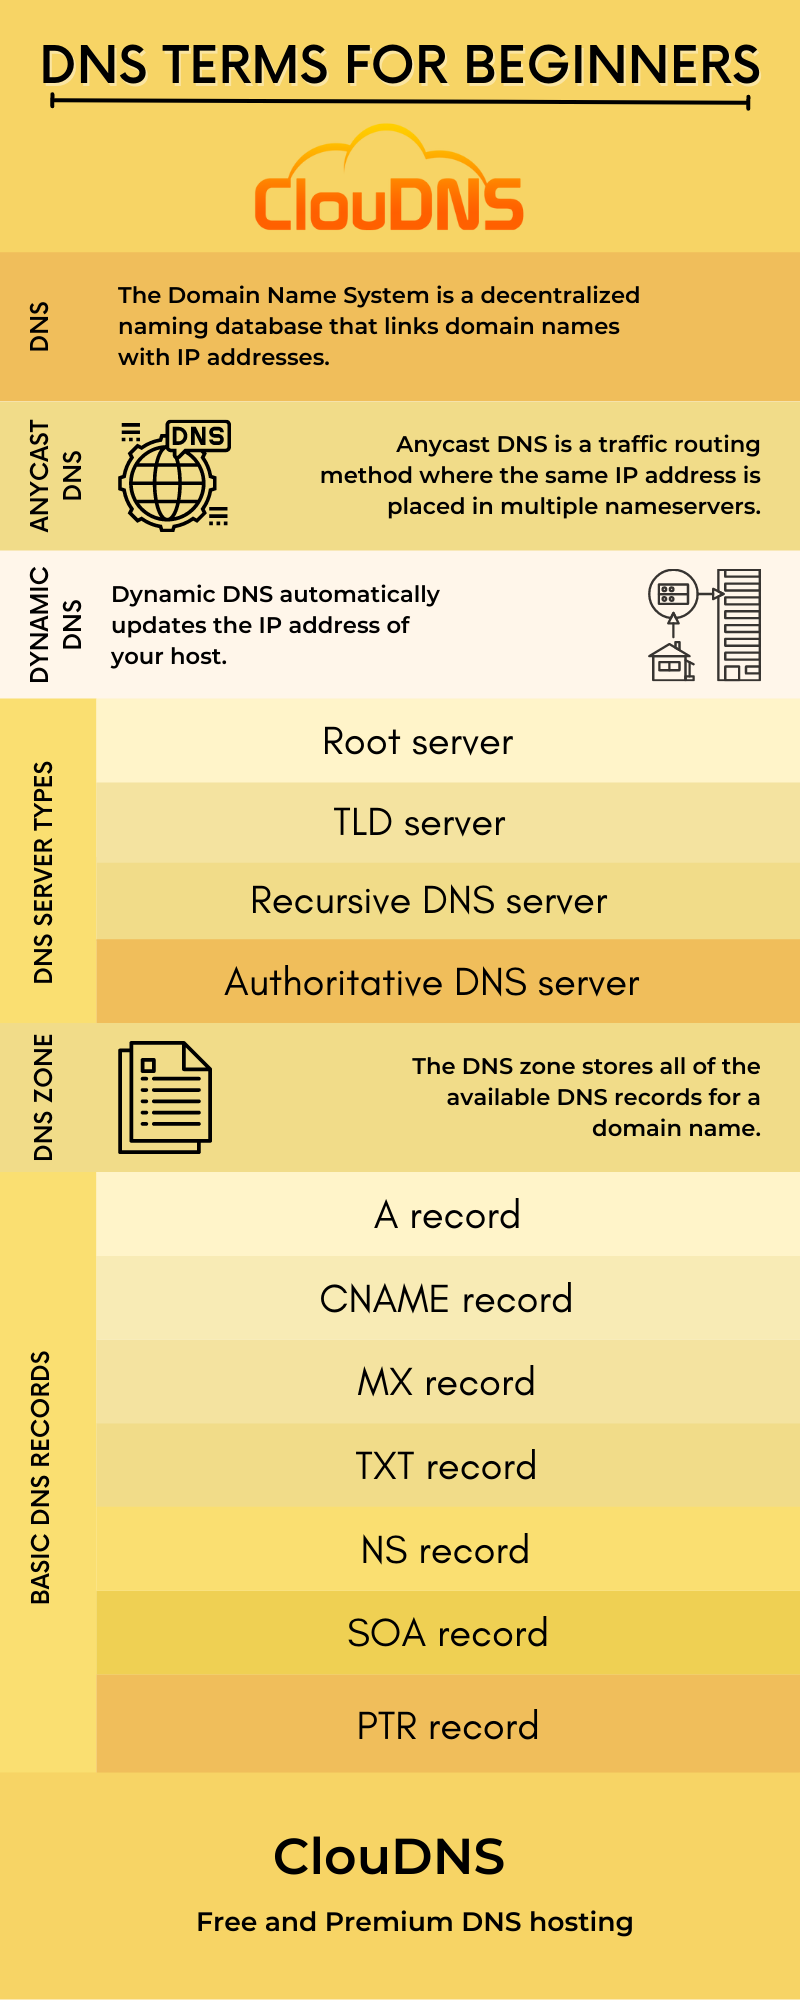 DNS terms for beginners